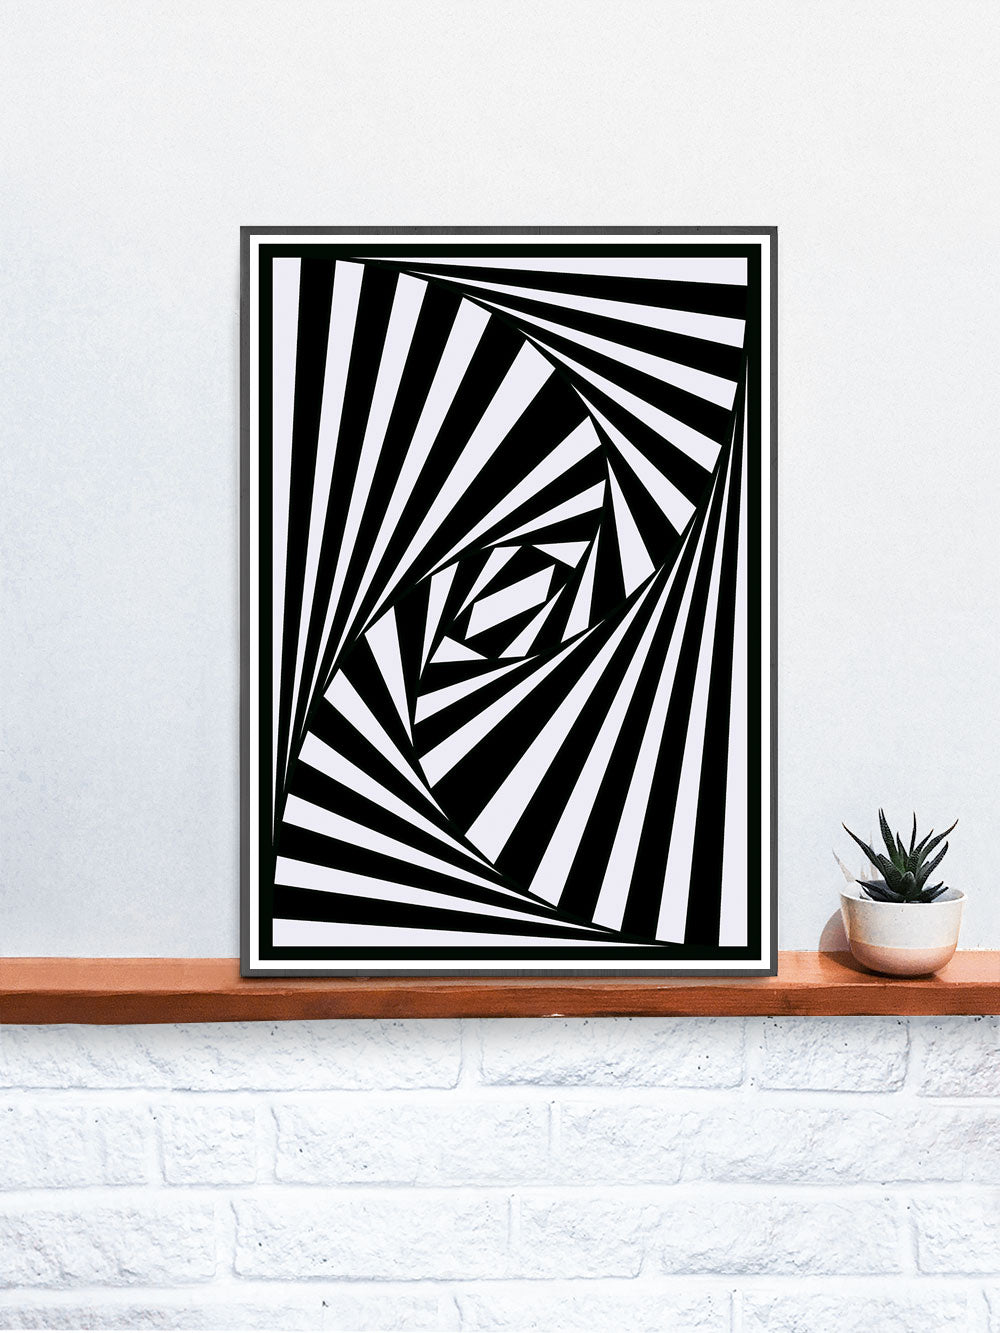 The Hypnosis Trippy Abstract Art on a Shelf